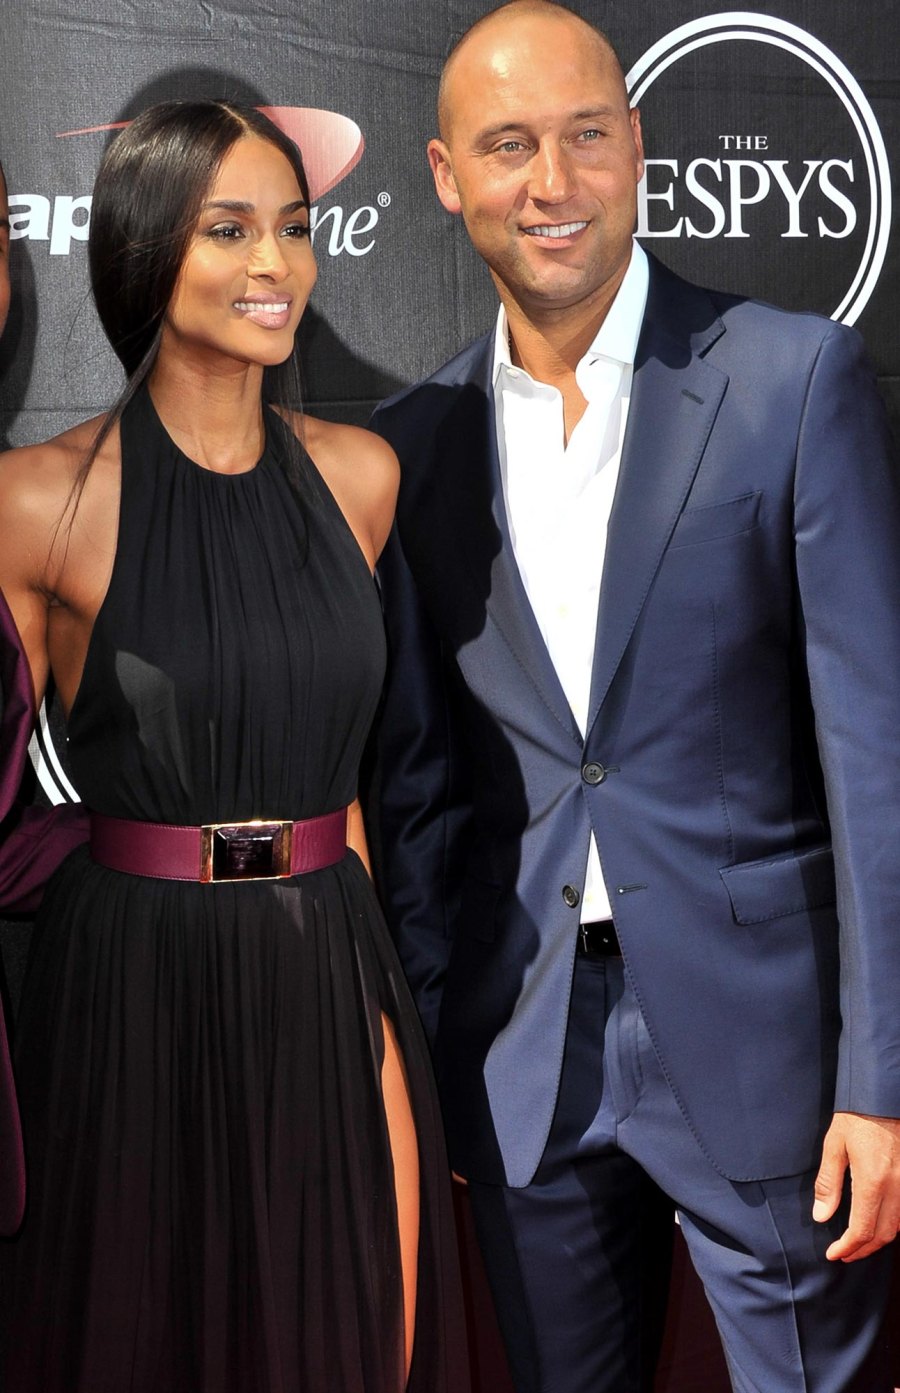 Stars You Didn’t Know Were Related 696 Ciara and Derek Jeter